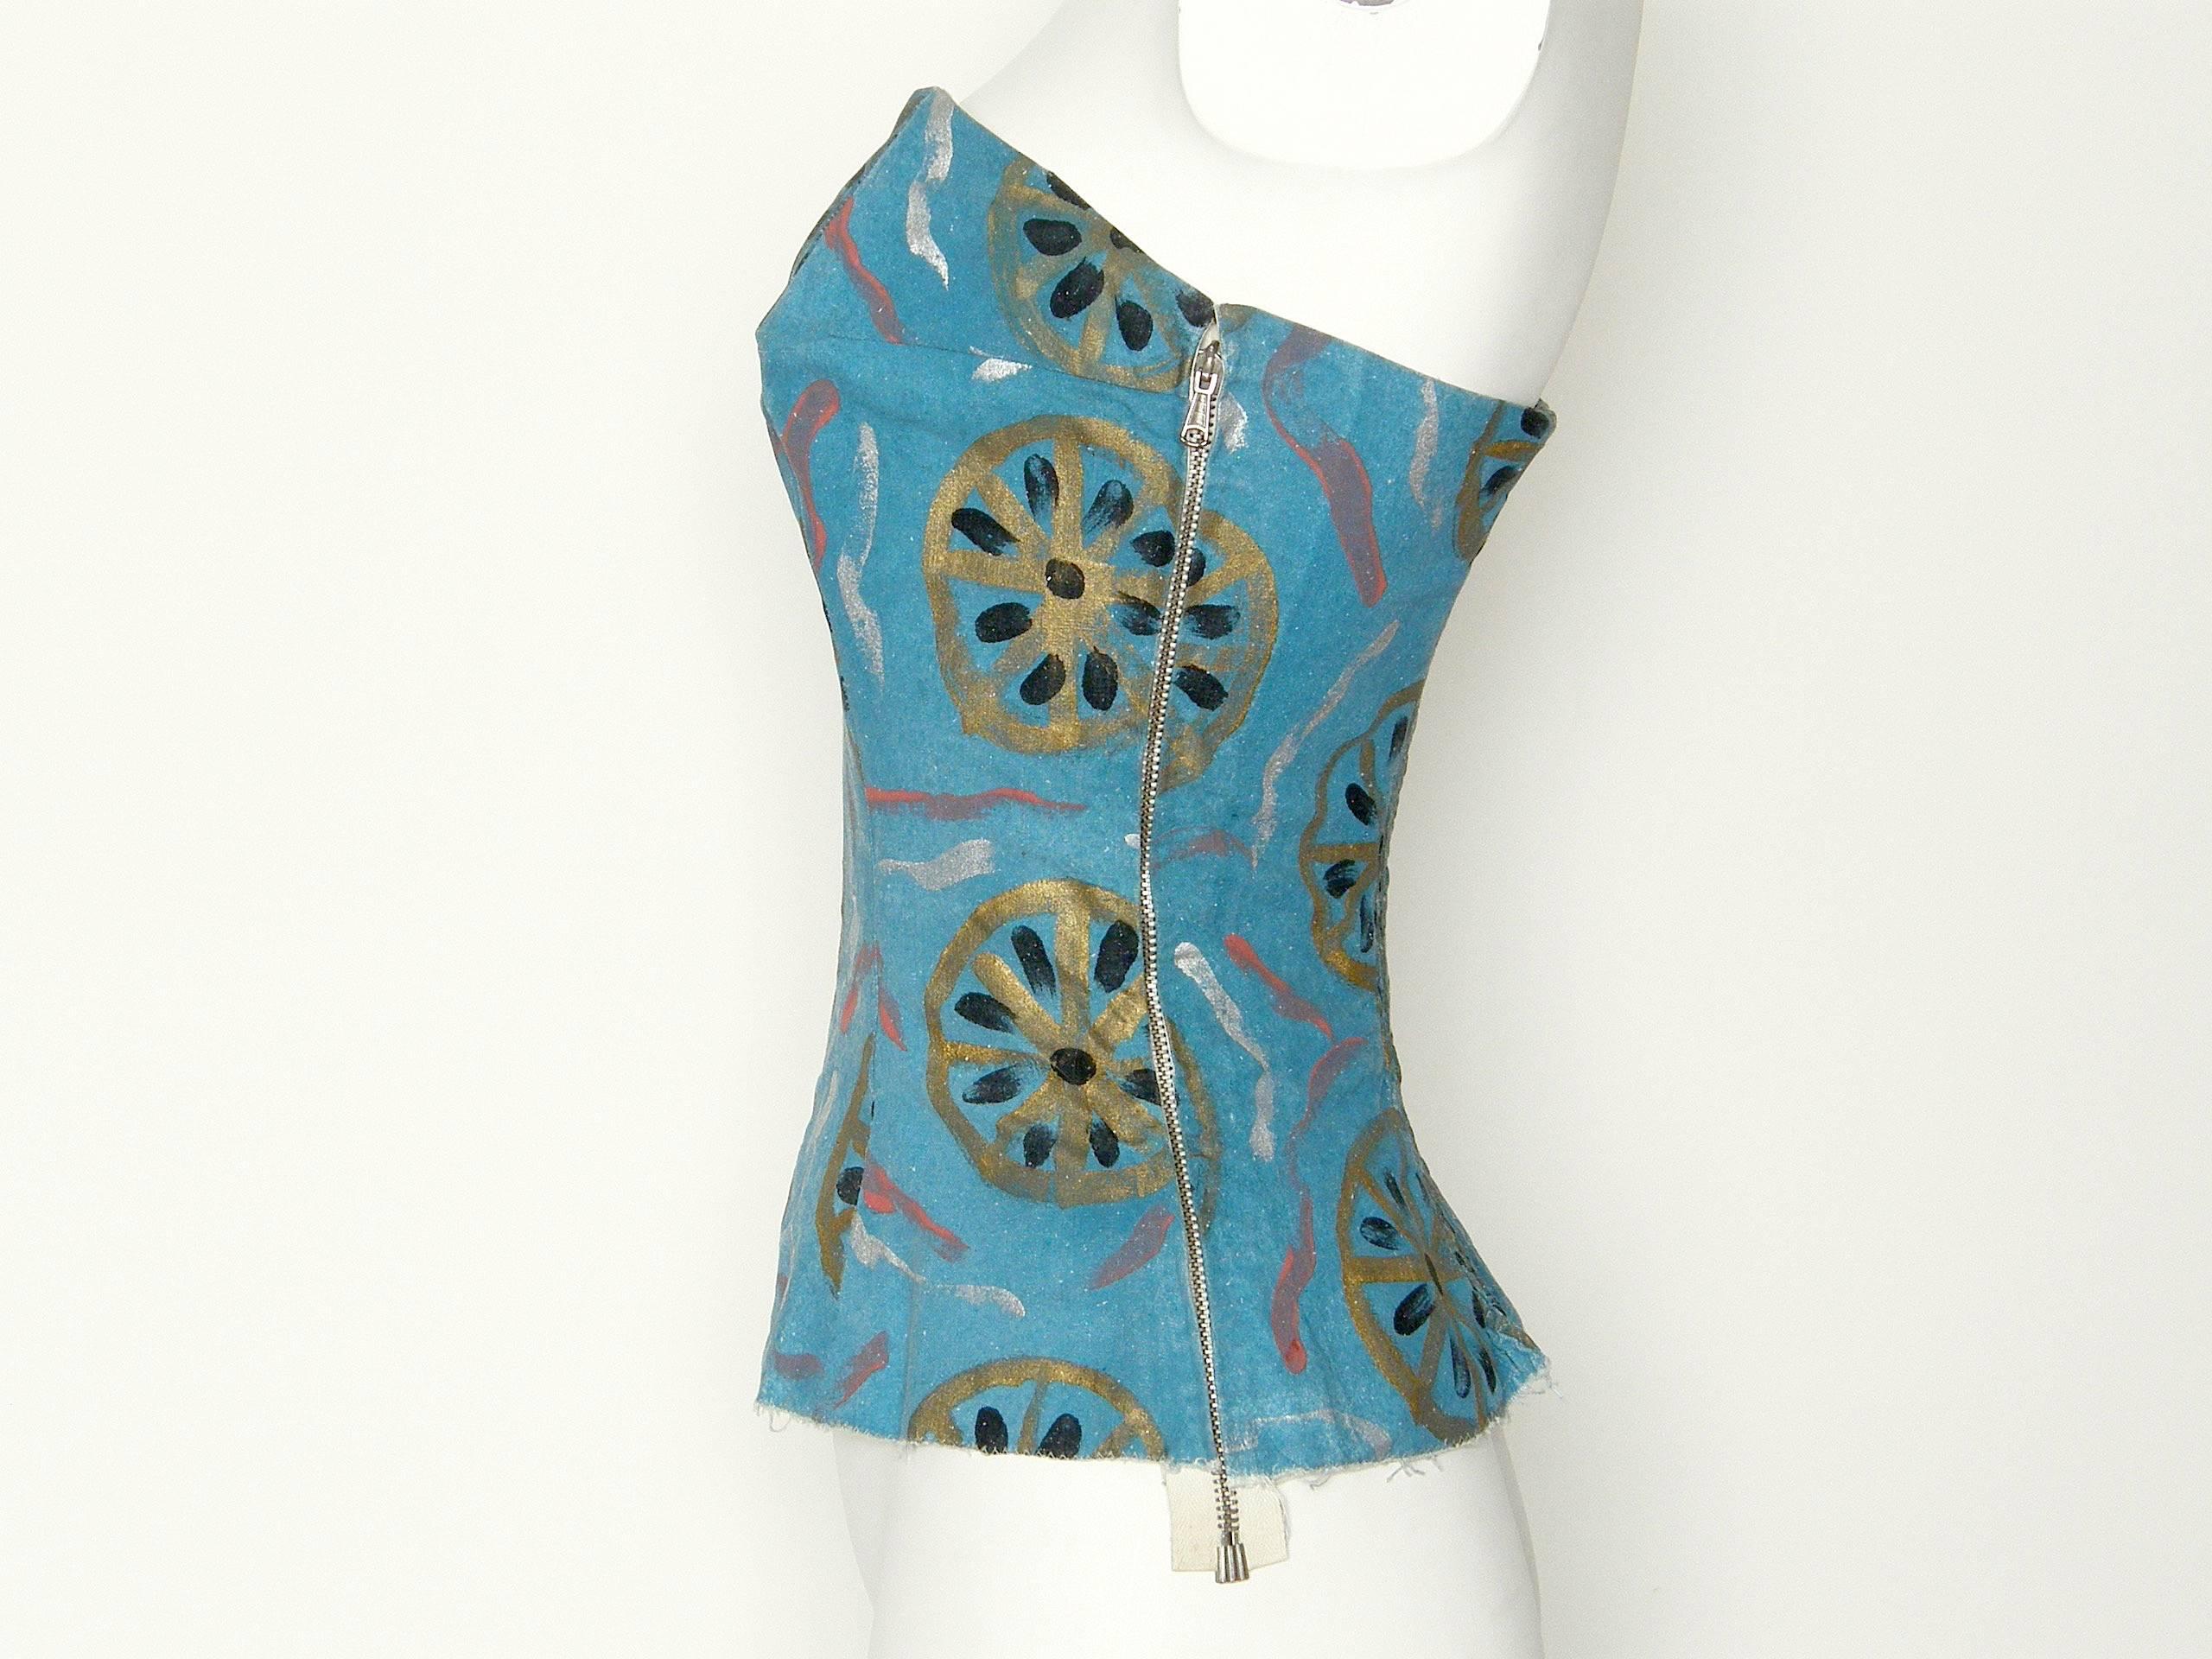 This rare and early Pucci bustier sun top is beautifully constructed. It's fully lined (except for the smocked panel in the back) with spiral steel bones, a petersham waist stay and side metal zipper. The fabric is not a typical Pucci print. The